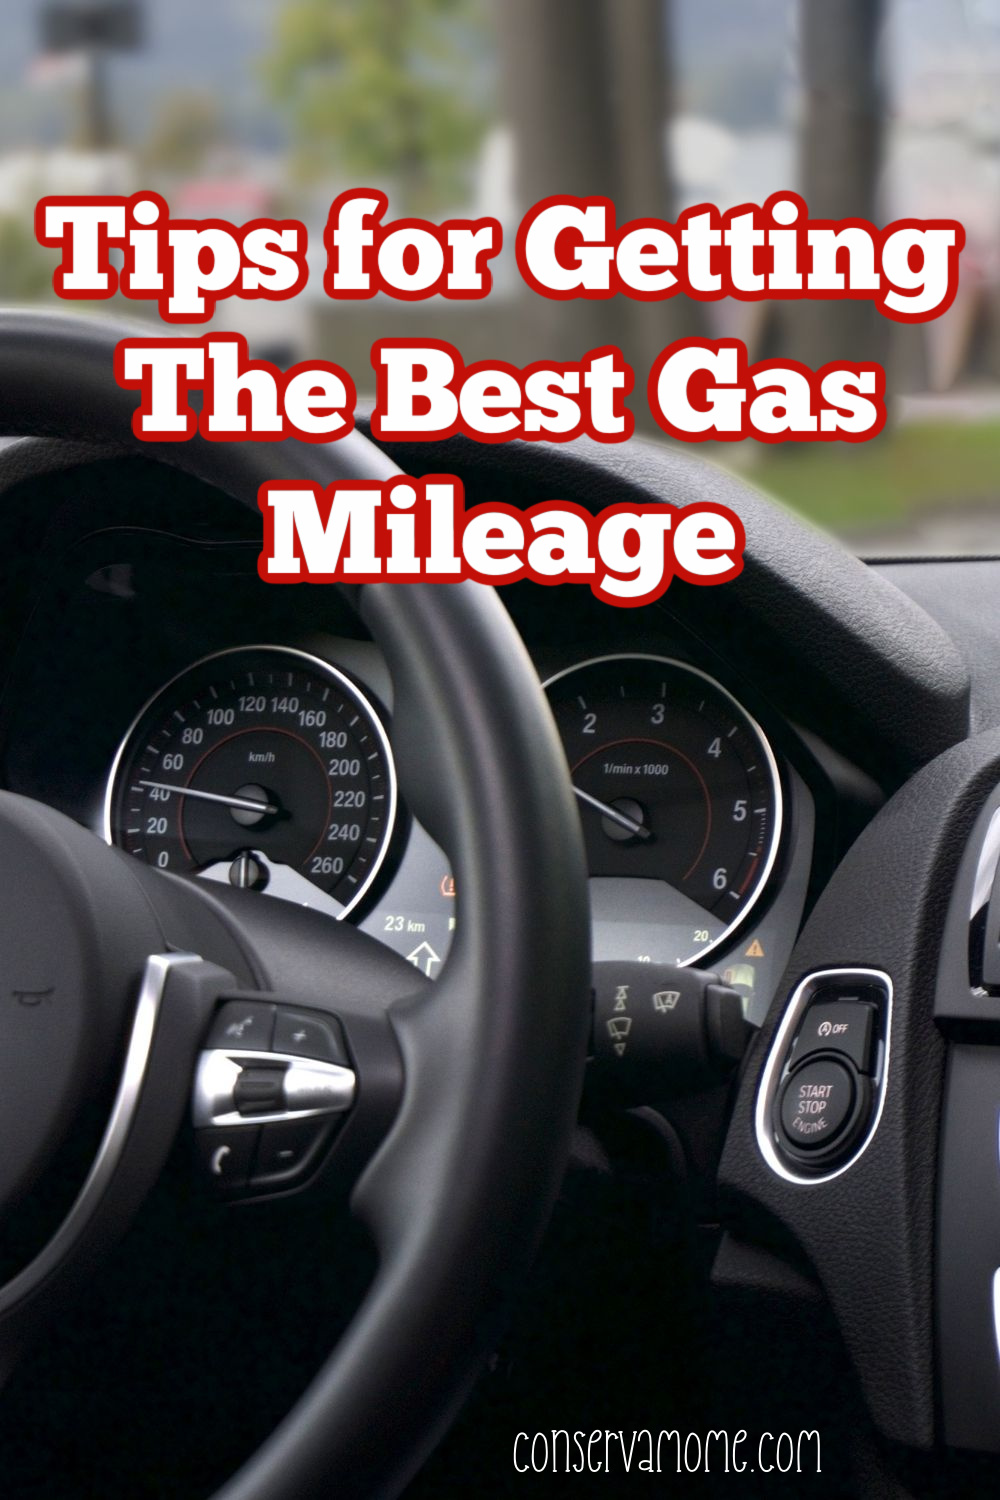 Tips for Getting The Best Gas Mileage